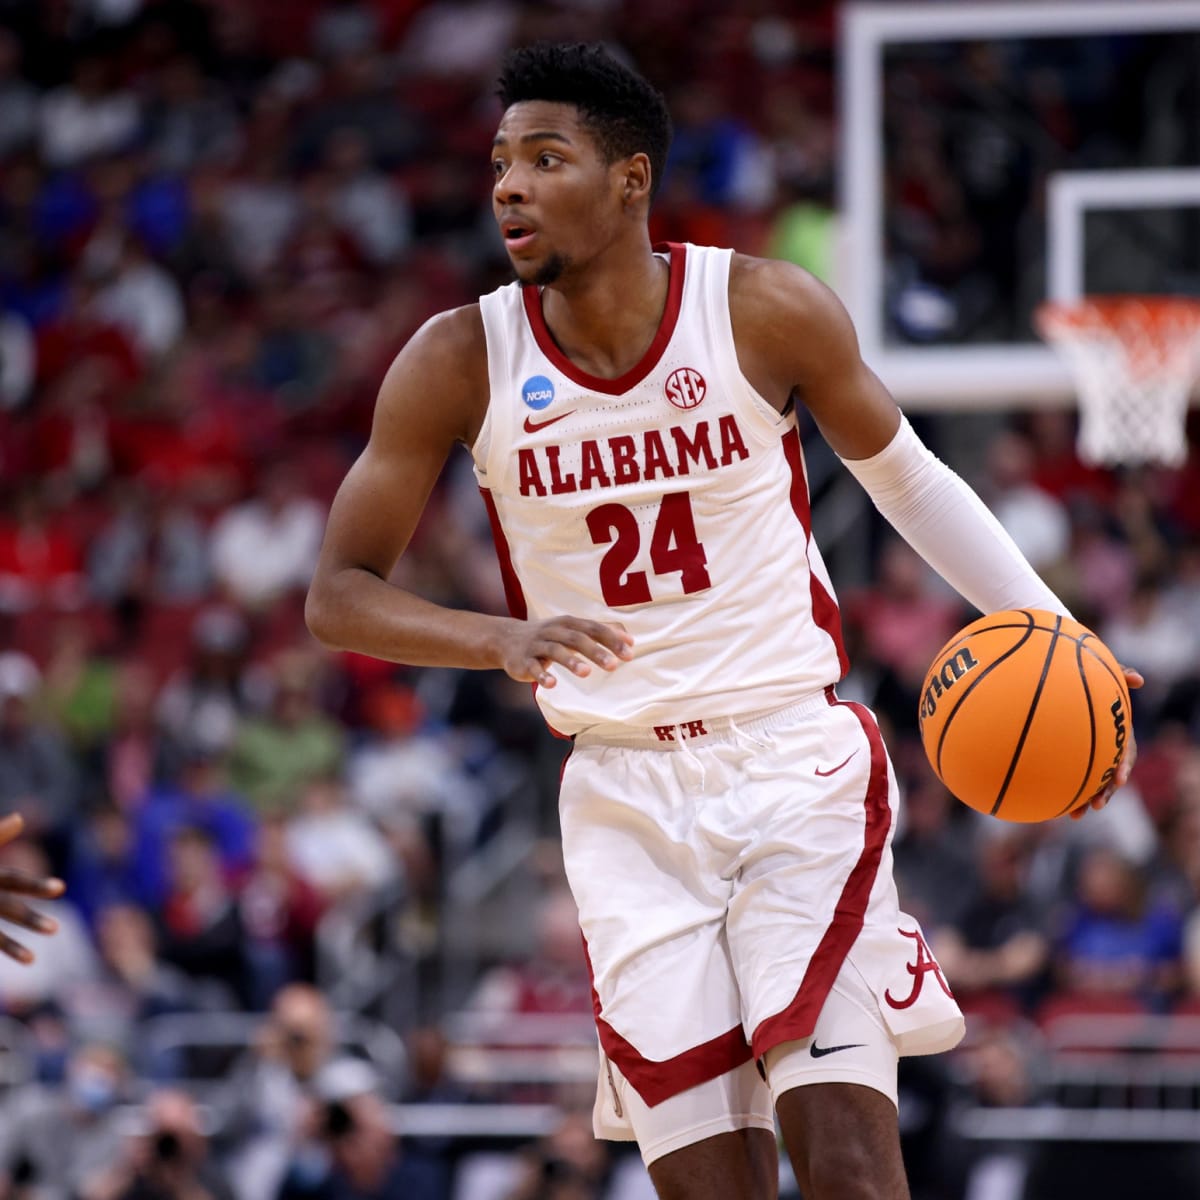 2023 NBA mock draft: Who will the Charlotte Hornets take No. 2 overall?